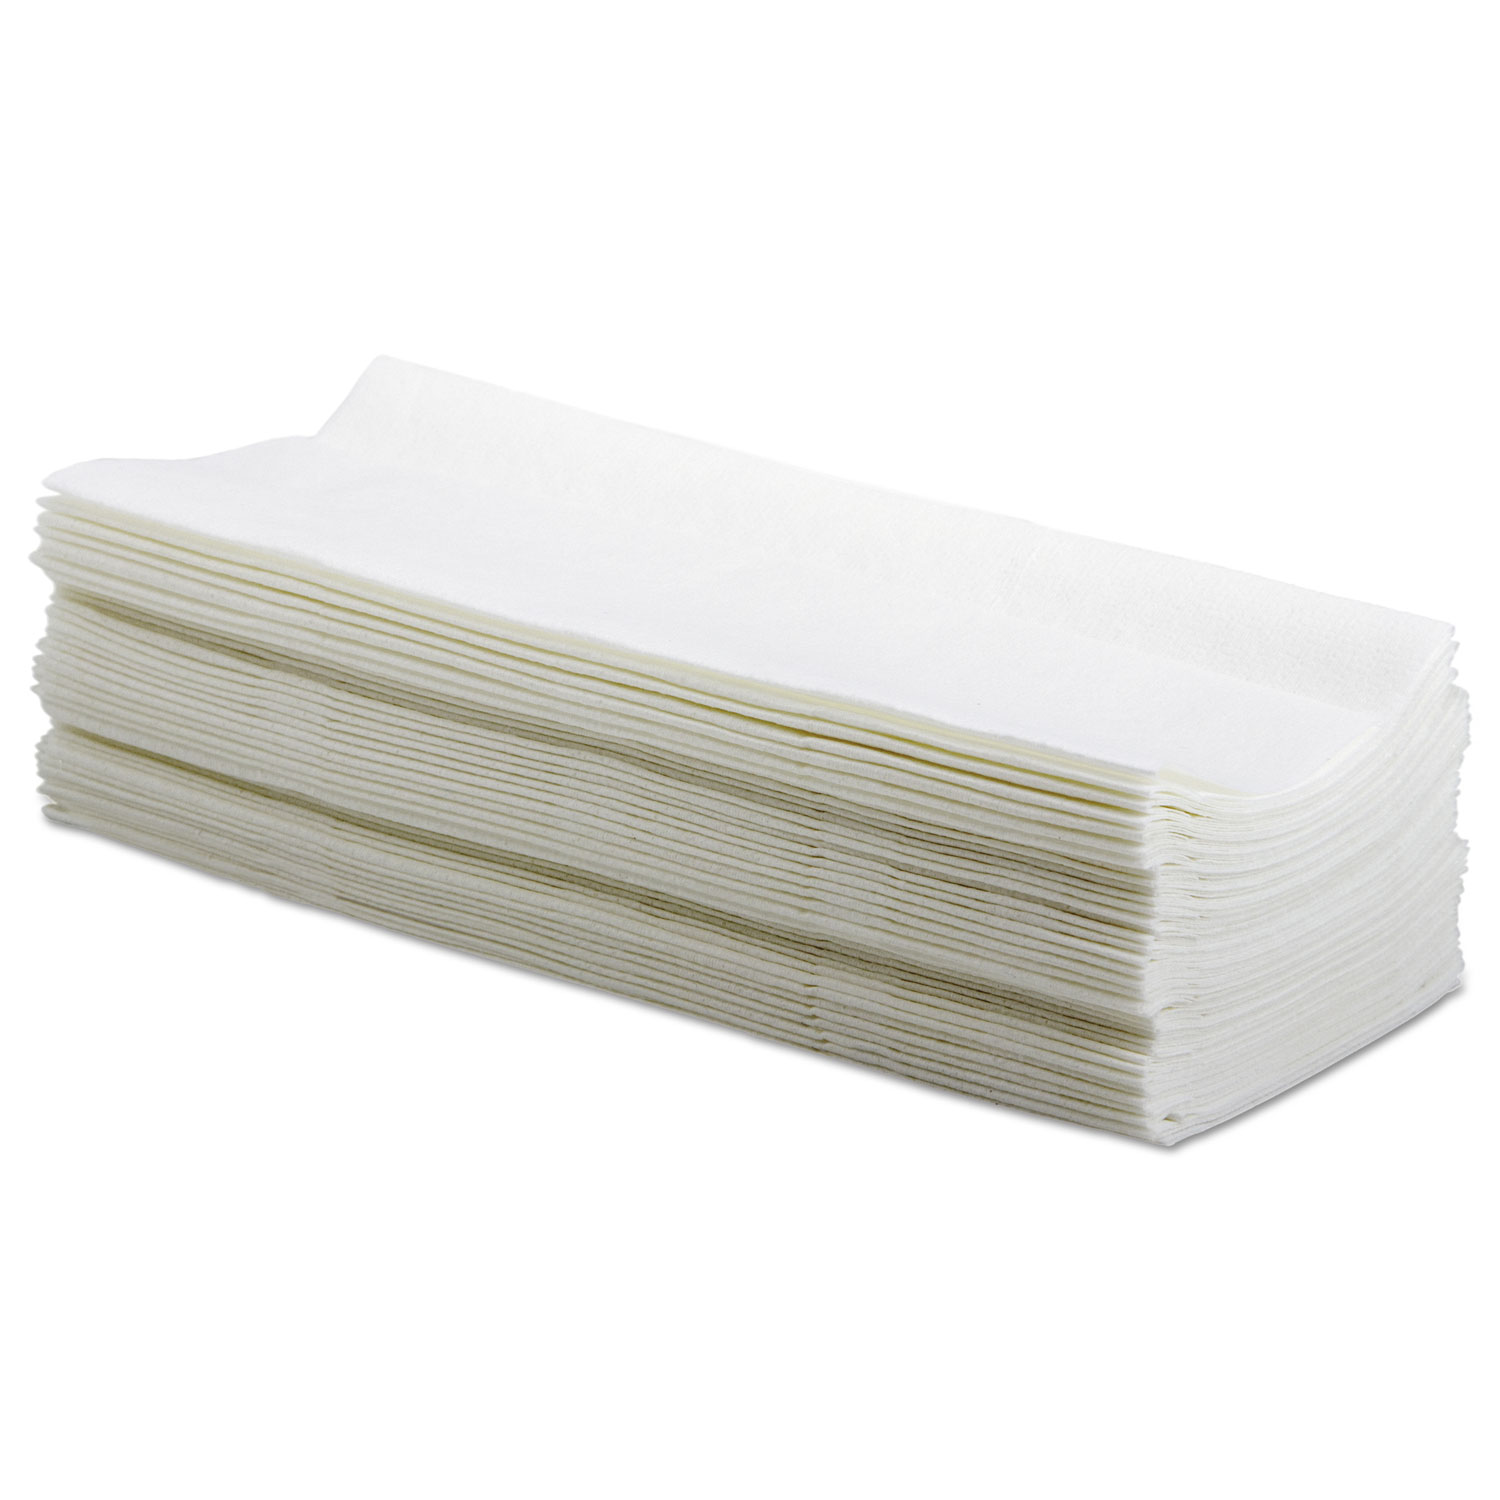 Hydrospun Wipers, White, 9 x 16 3/4, 10 Pack Dispensers of 100, 1000/Carton